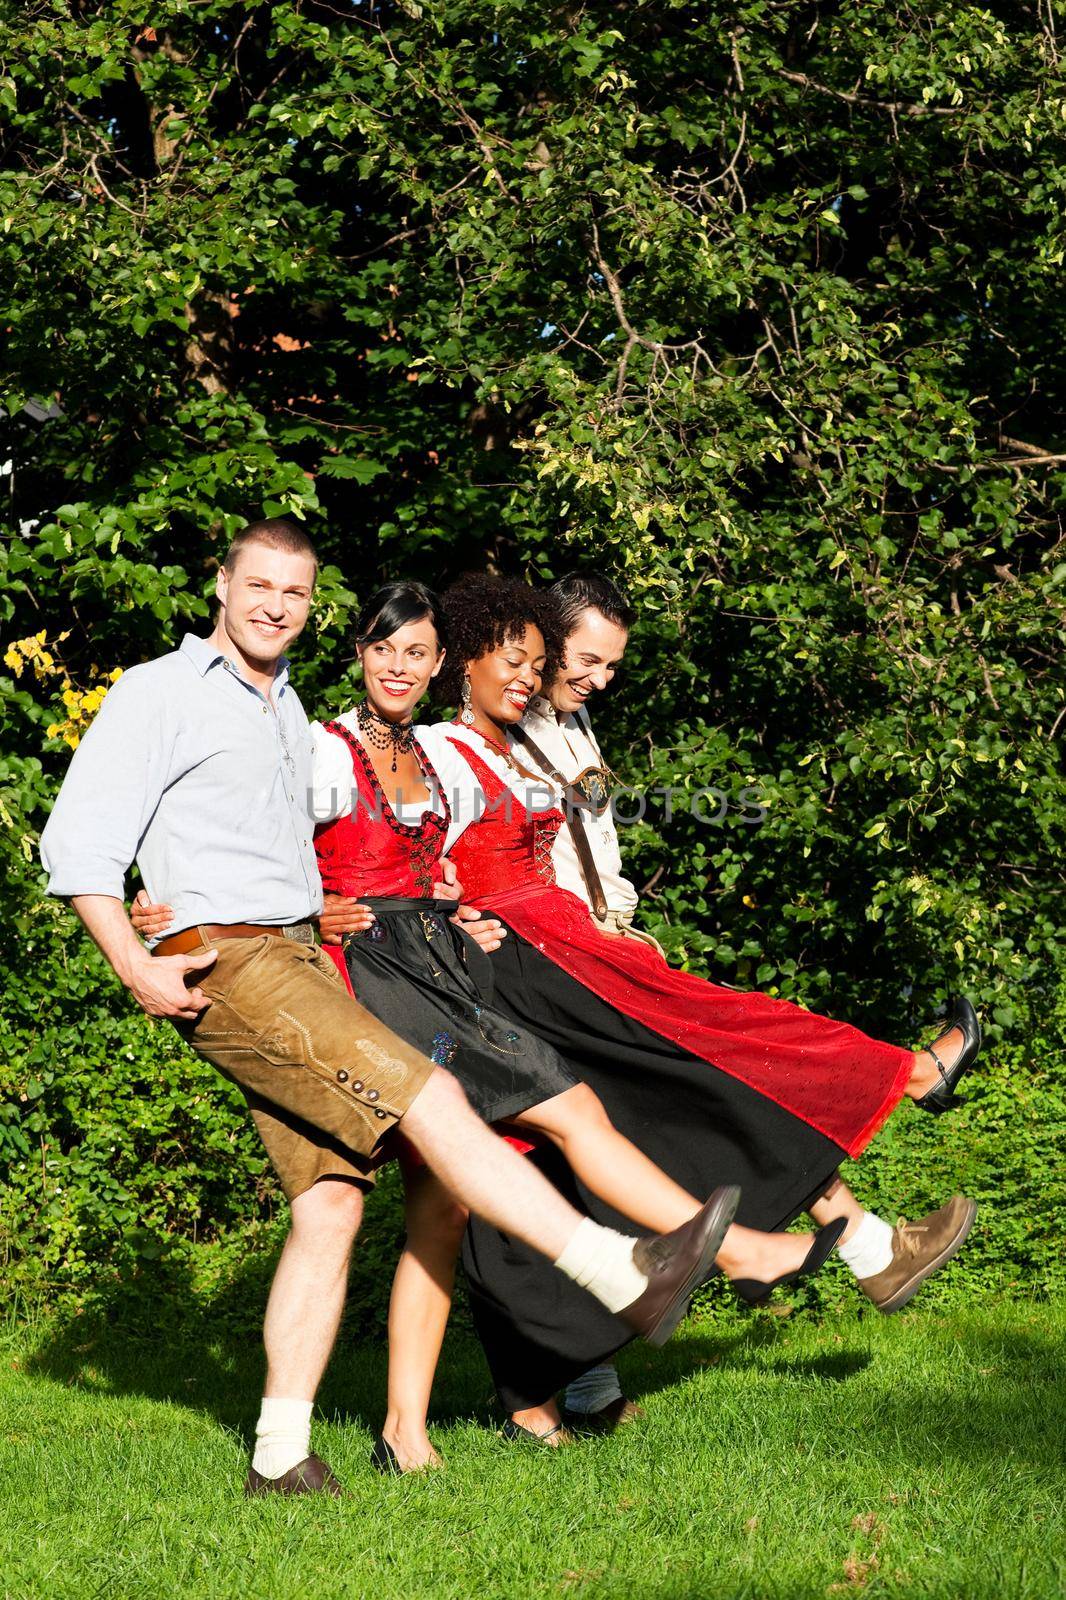 Group of four people - two Couples - in traditional Bavarian dress, Lederhosen and Dirndl, in summer